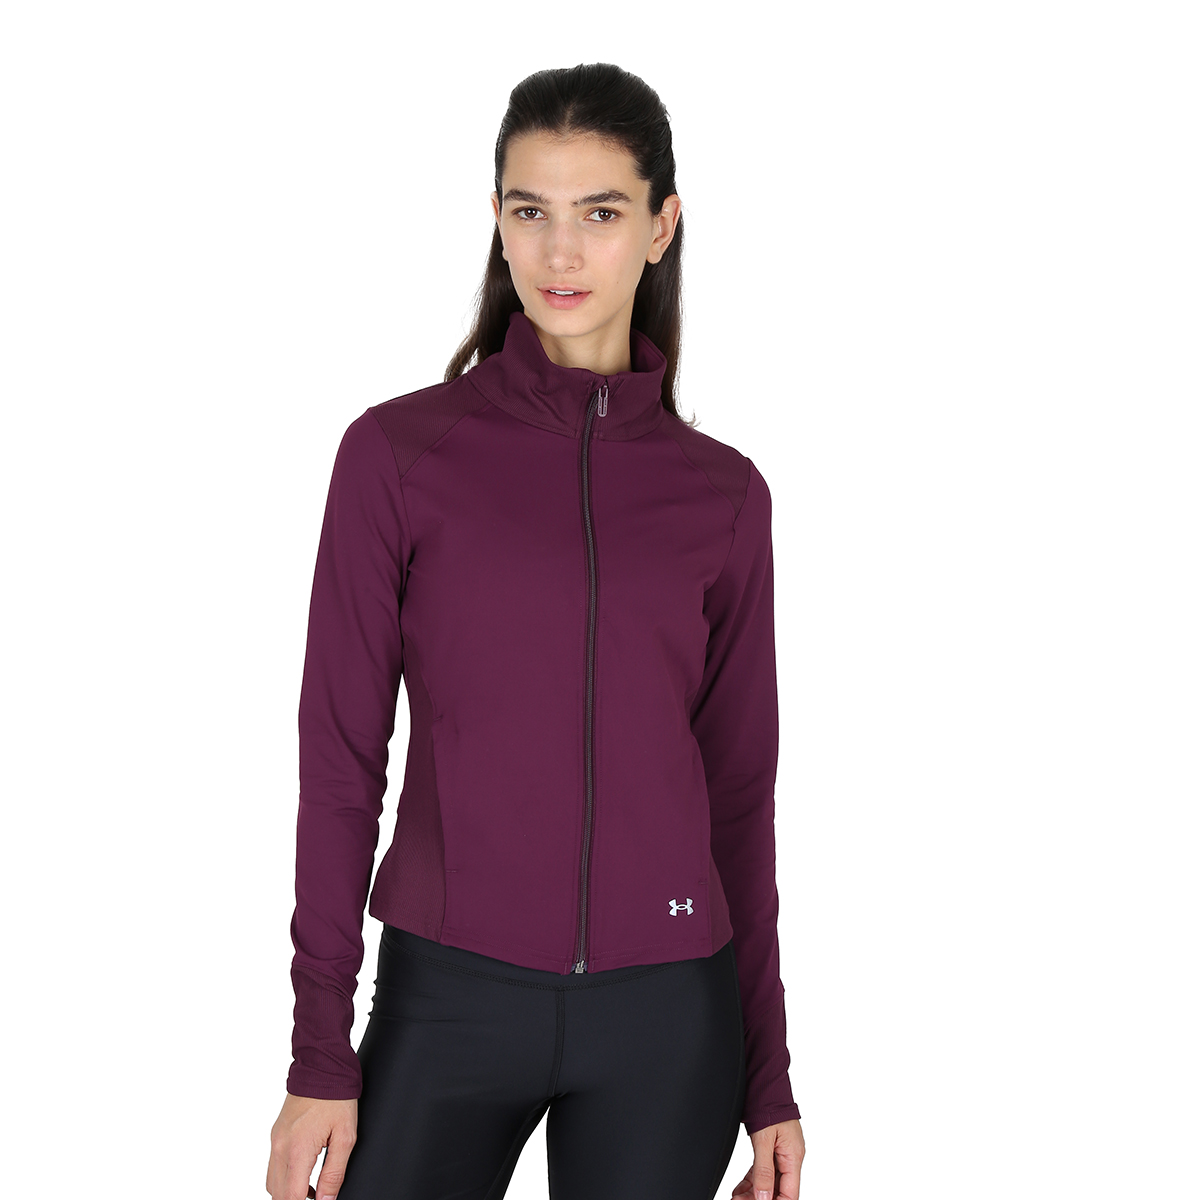 Campera Entrenamiento Under Armour Meridian Mujer,  image number null